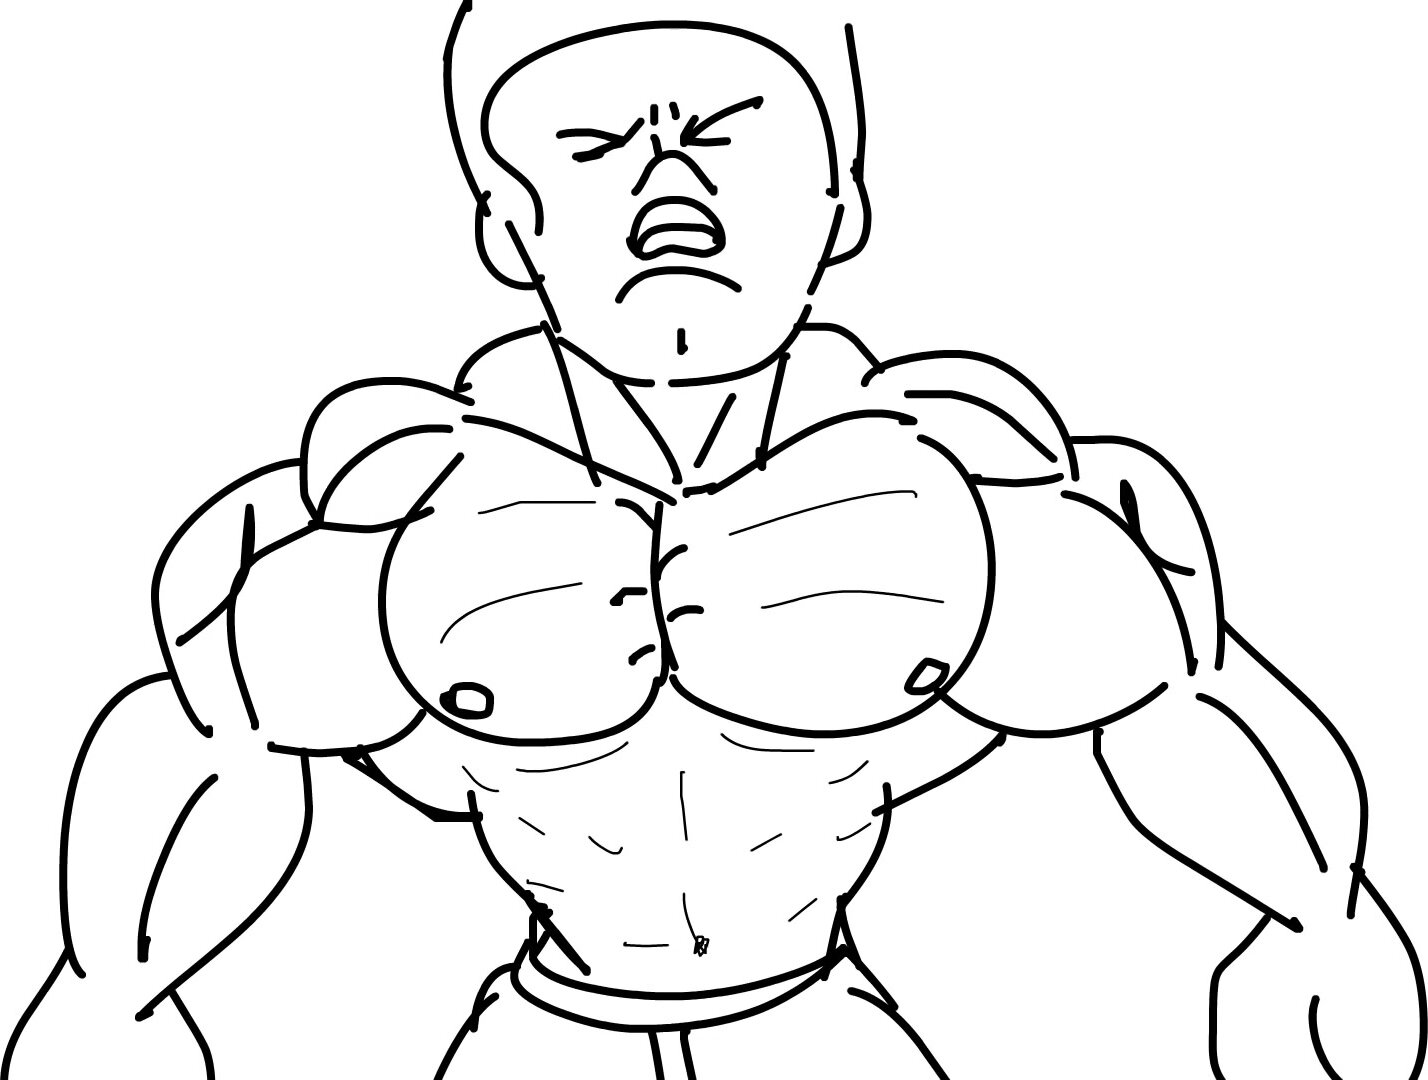 muscle growth animation (1)